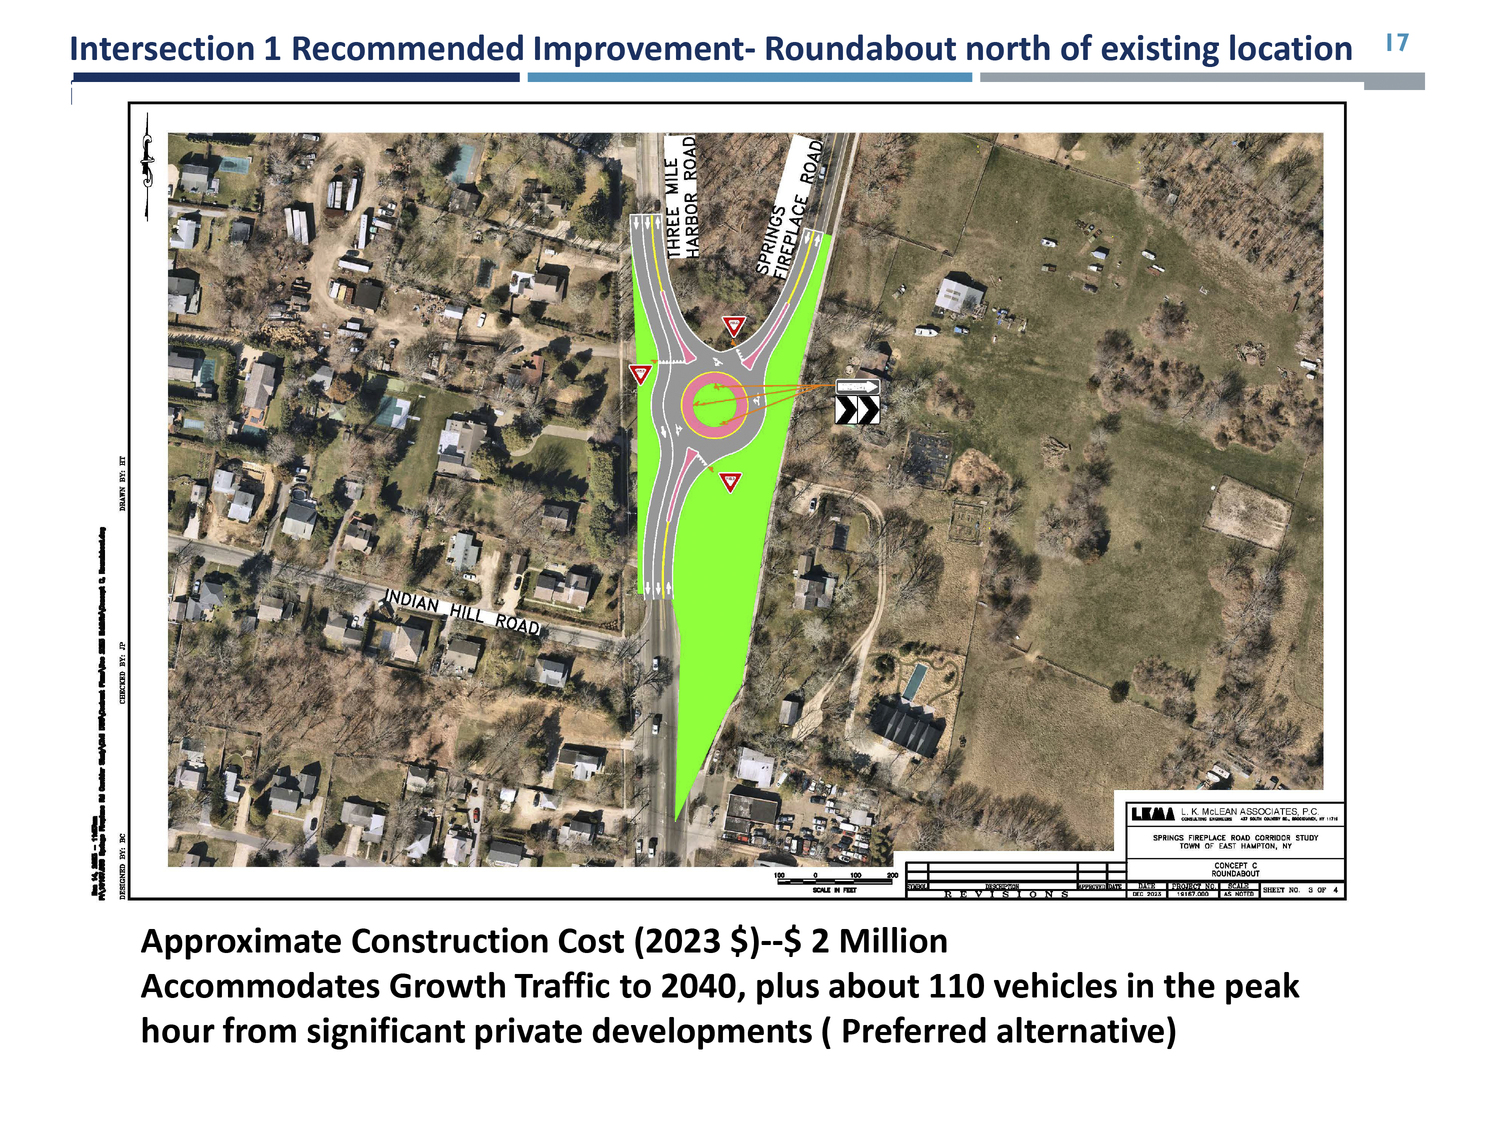 During the Springs-Fireplace Road Corridor Study conducted by the town in 2022 and 2023, engineers designed a proposed roundabout as a solution to the hazardous and confusing traffic conditions at the intersection of North Main Street, Three Mile Harbor Road and Springs-Fireplace Road. LK MCLEAN ASSOCIATES